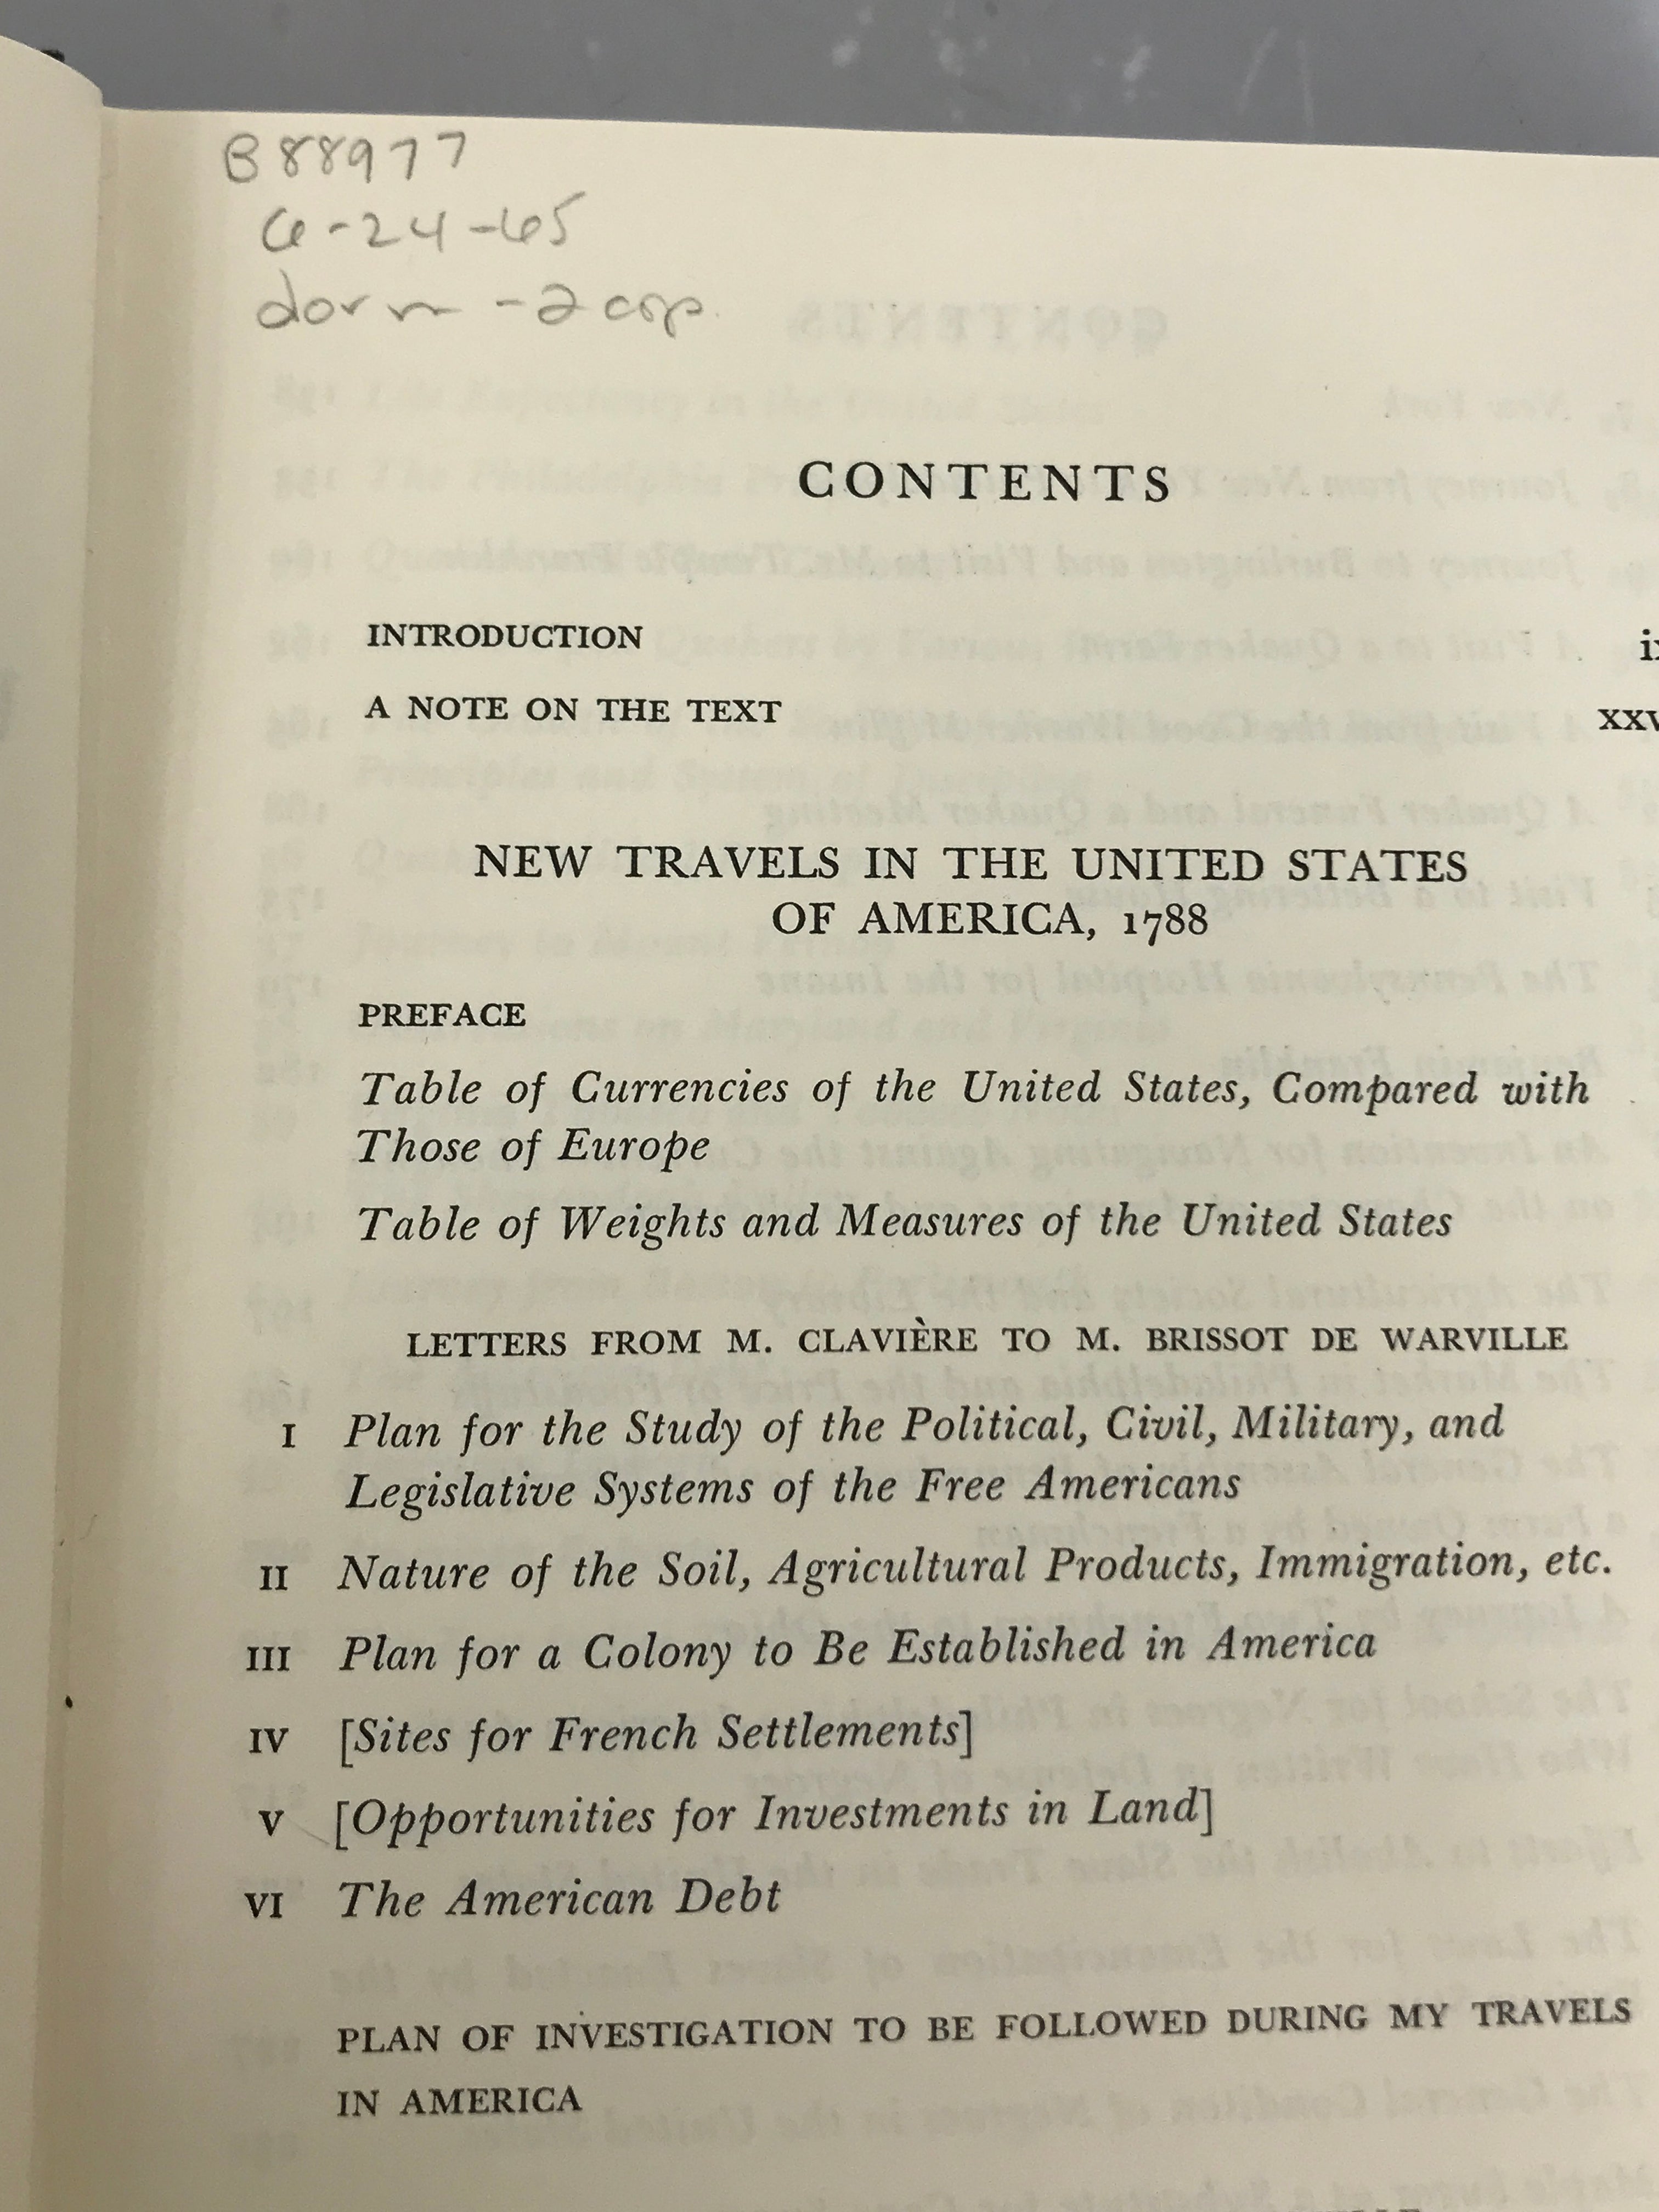 New Travels in the United States of America 1788 by De Warville The John Harvard Library 1964 HC